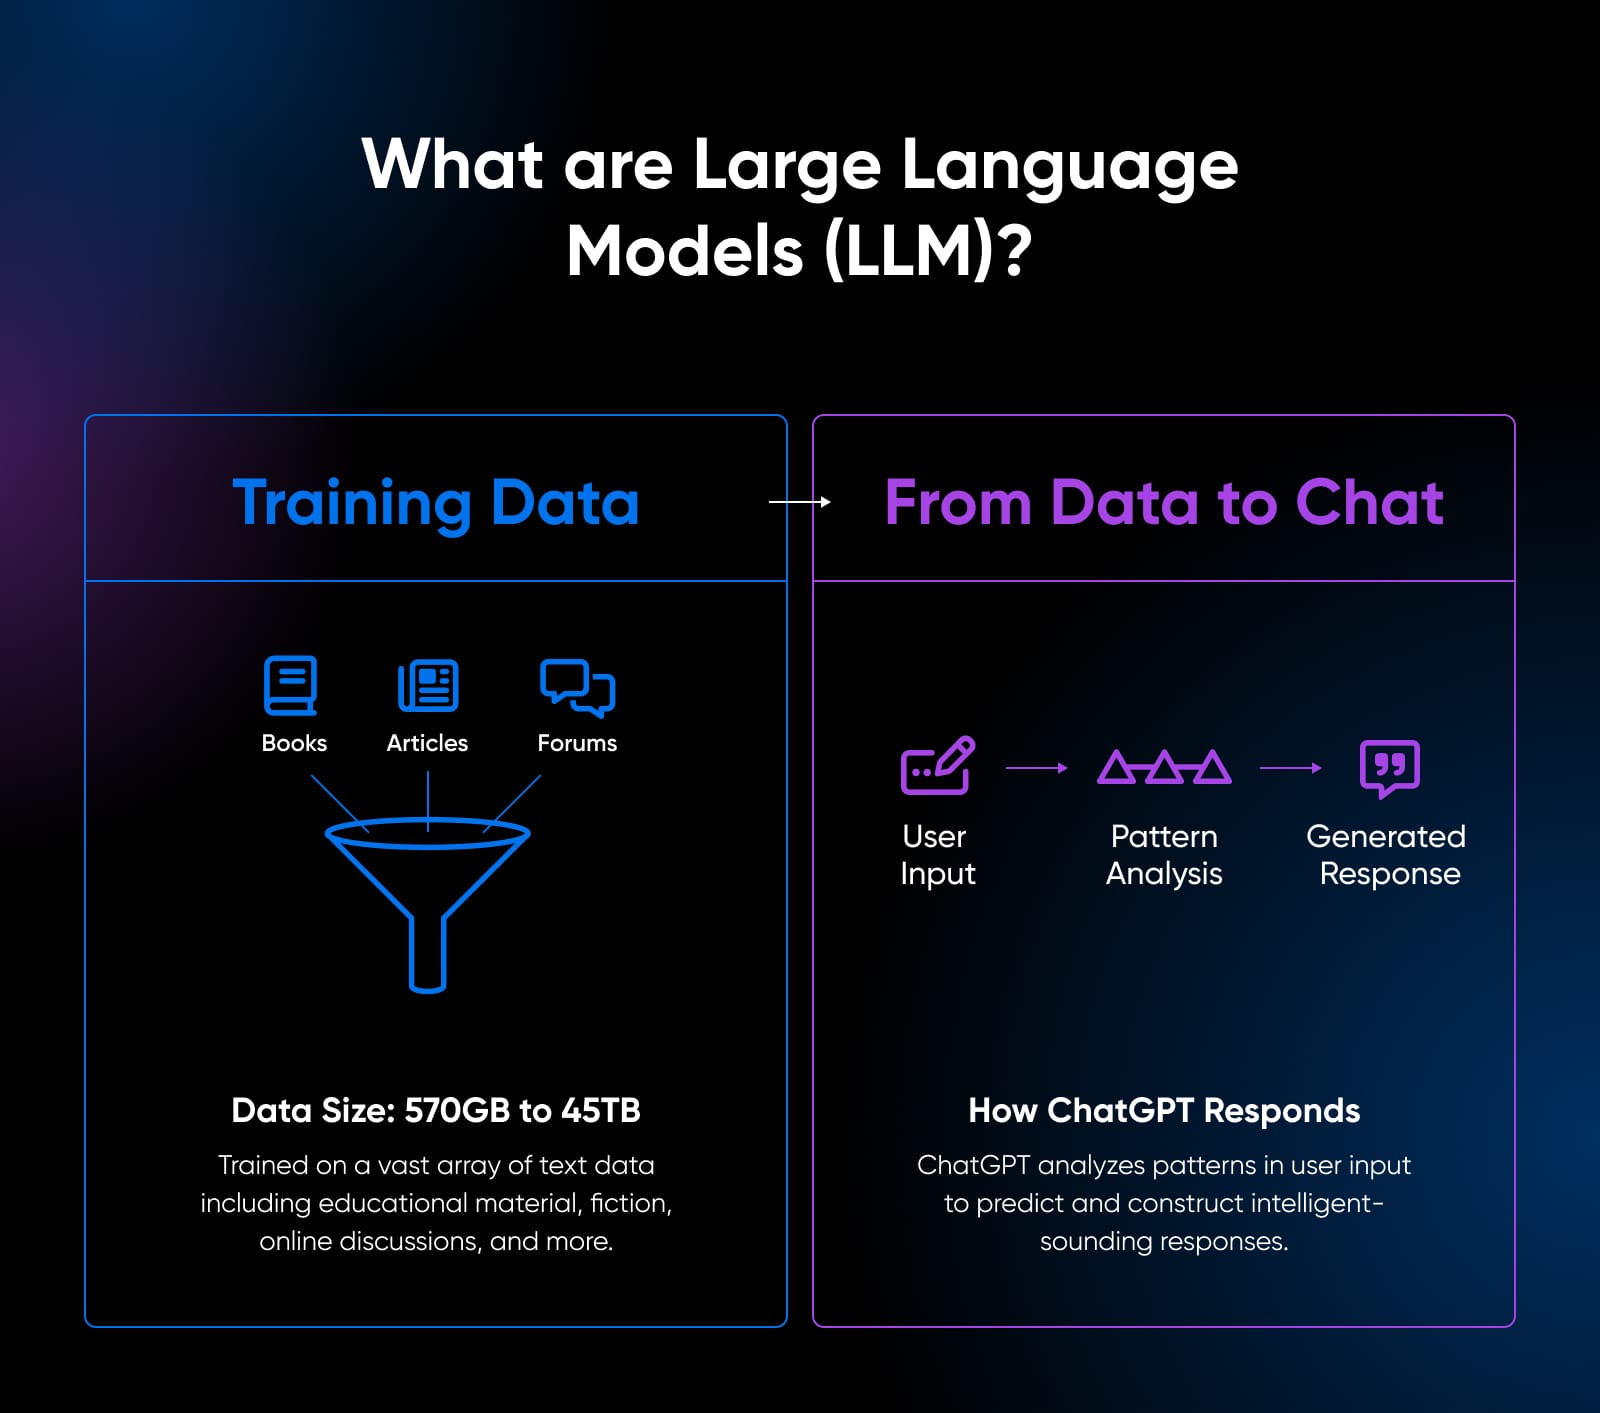 LLM with training data on the left showing information going into a funnel and from data to chat on the right showing user input to pattern analysis to generated reponse